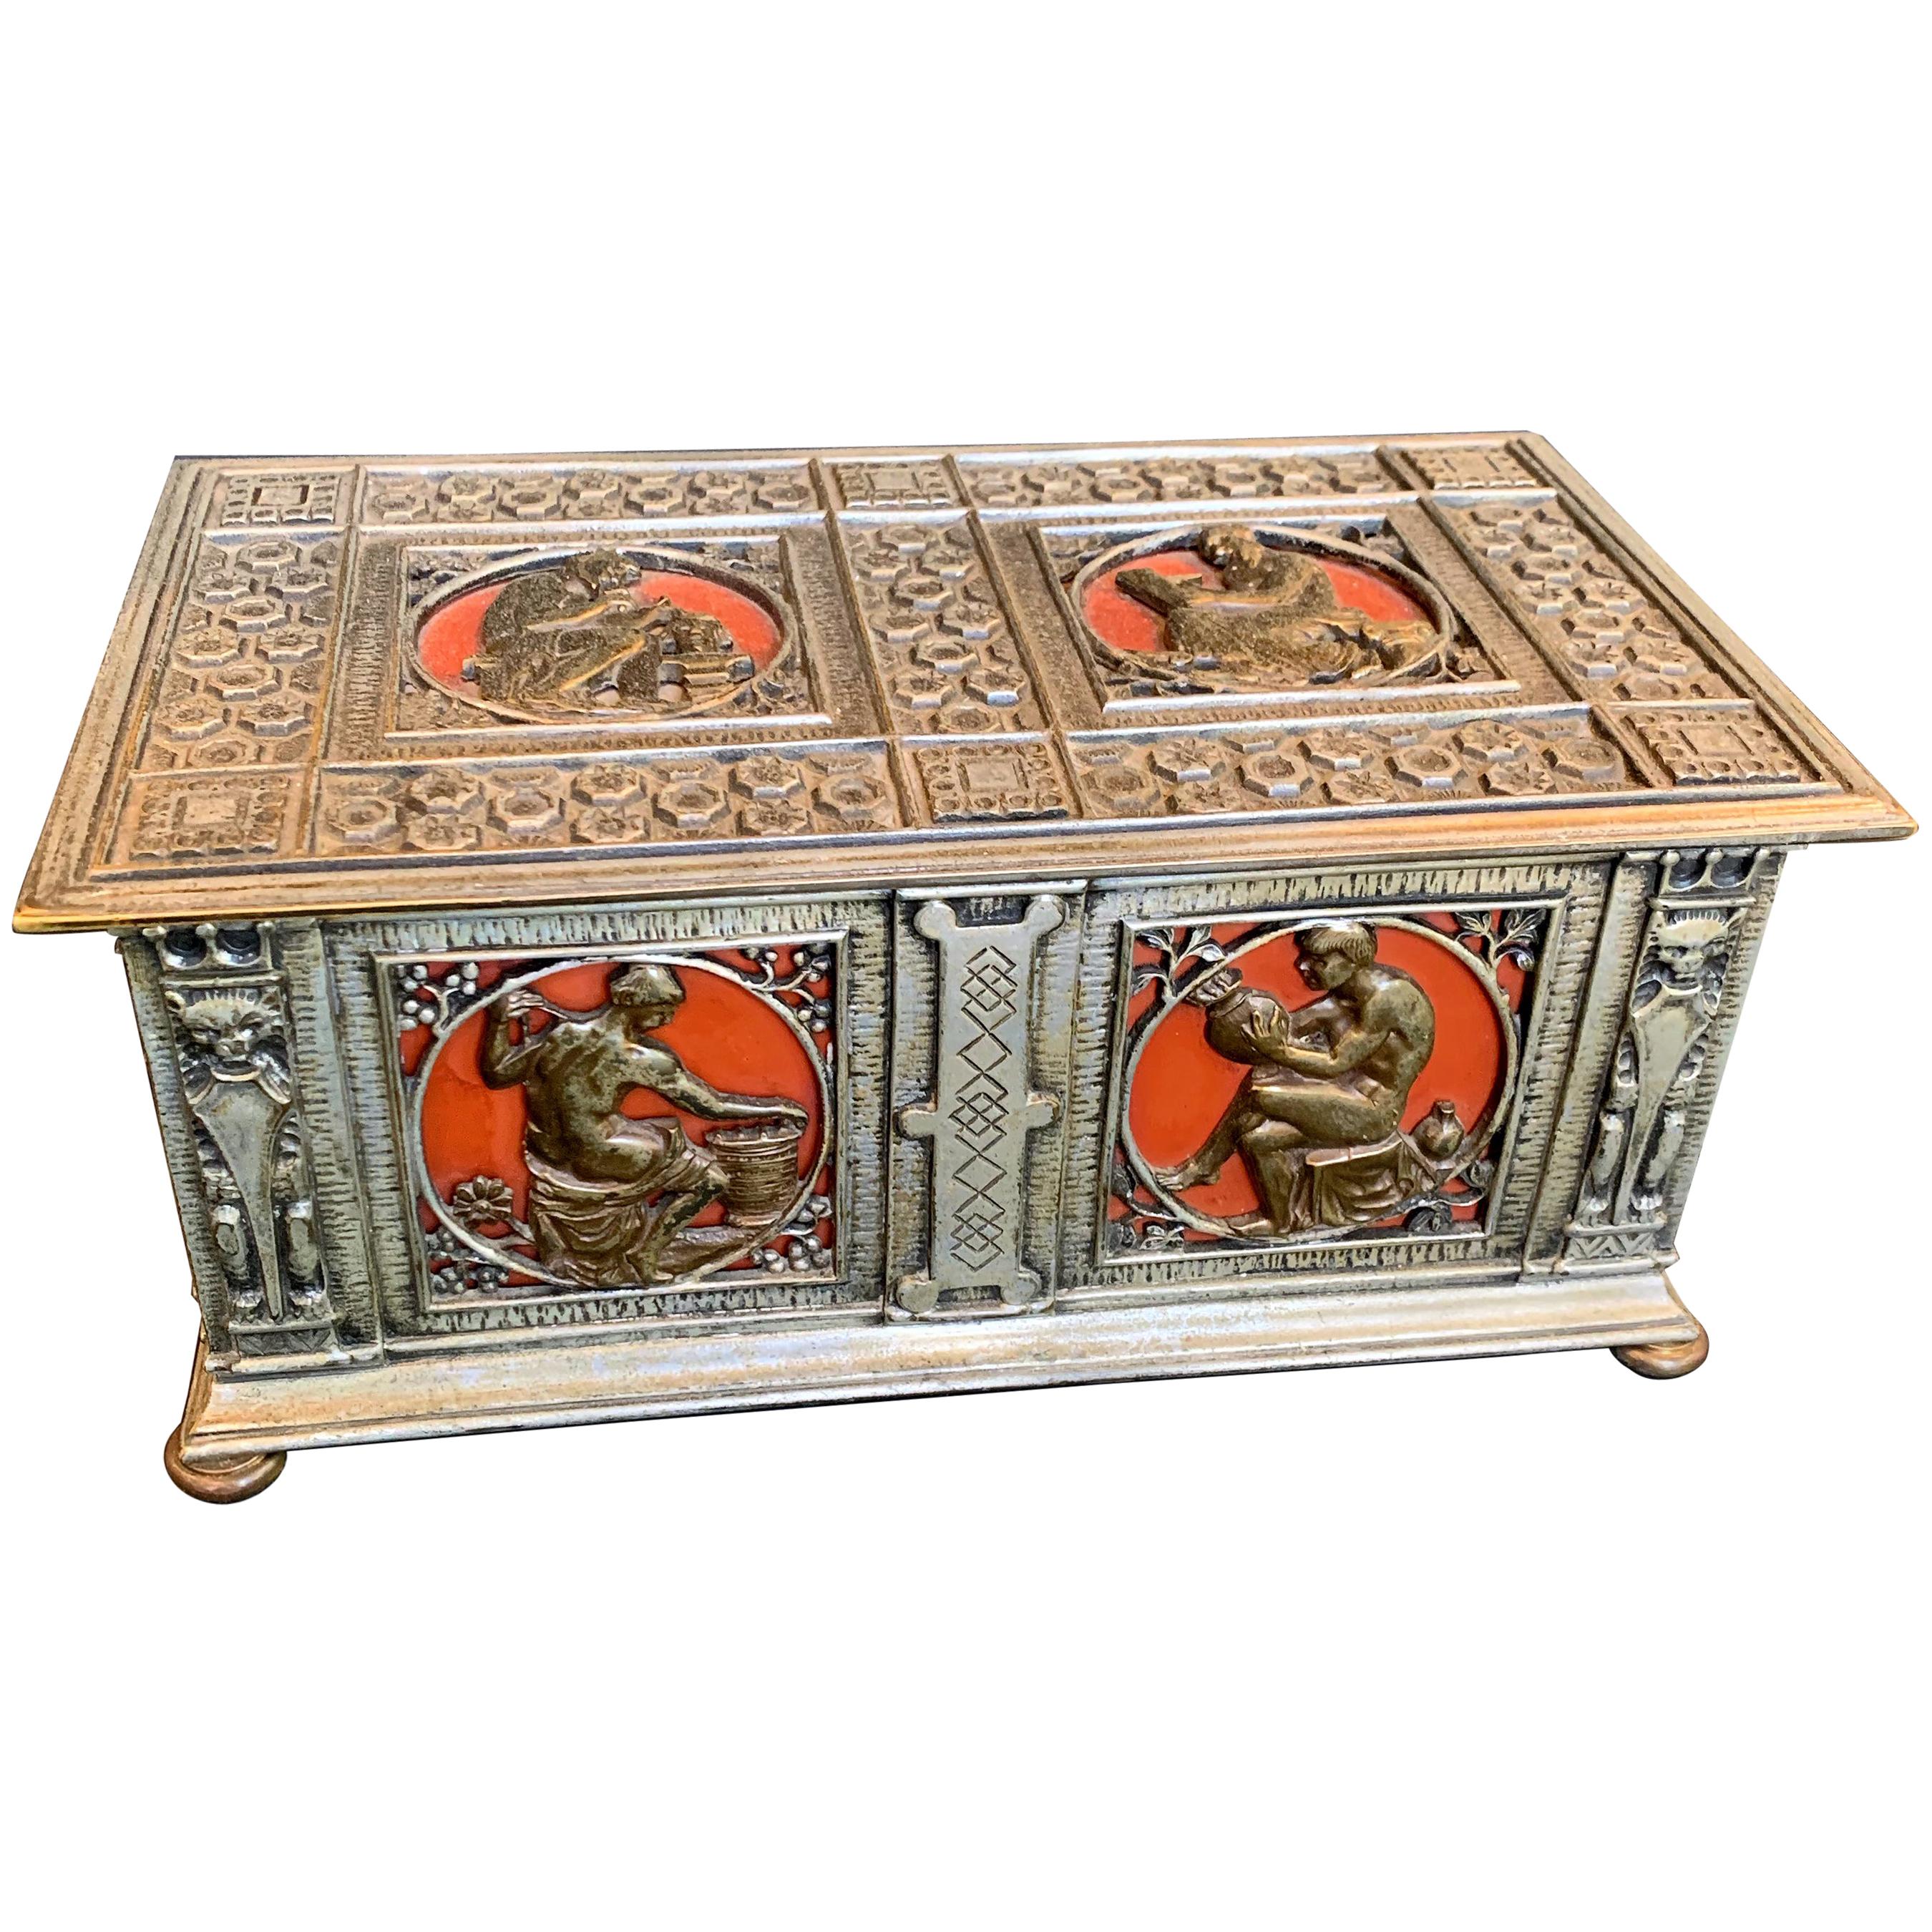 "The Arts, " Large Silvered Bronze Casket with Symbols of Pottery, Spinning et Al For Sale